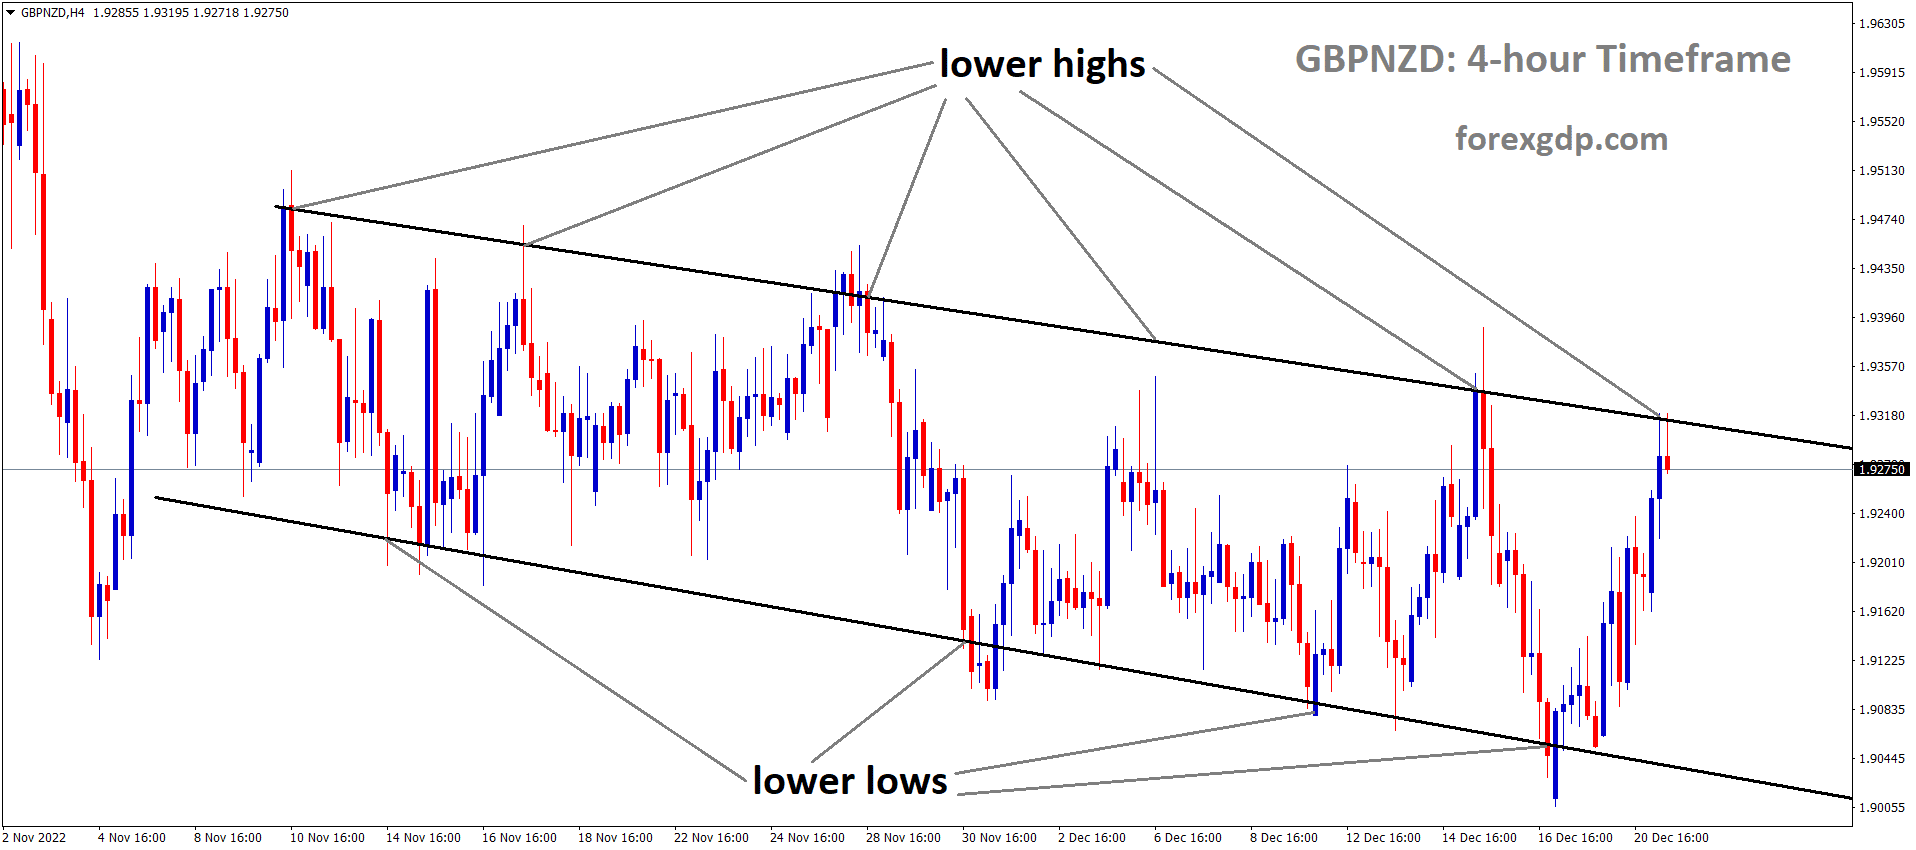 GBPNZD is moving in the Descending channel and the market has reached the lower high area of the channel 2